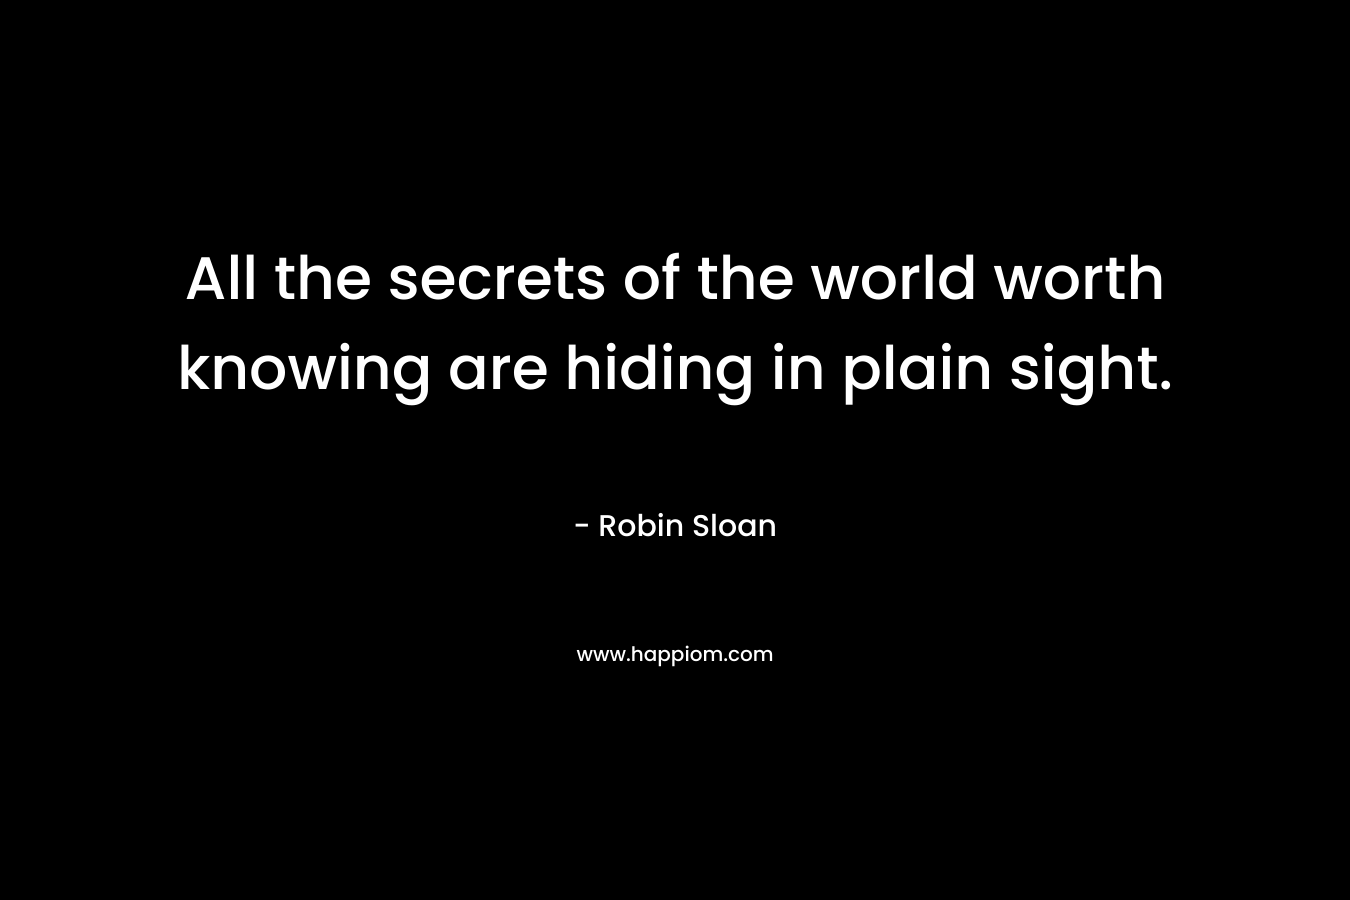 All the secrets of the world worth knowing are hiding in plain sight.